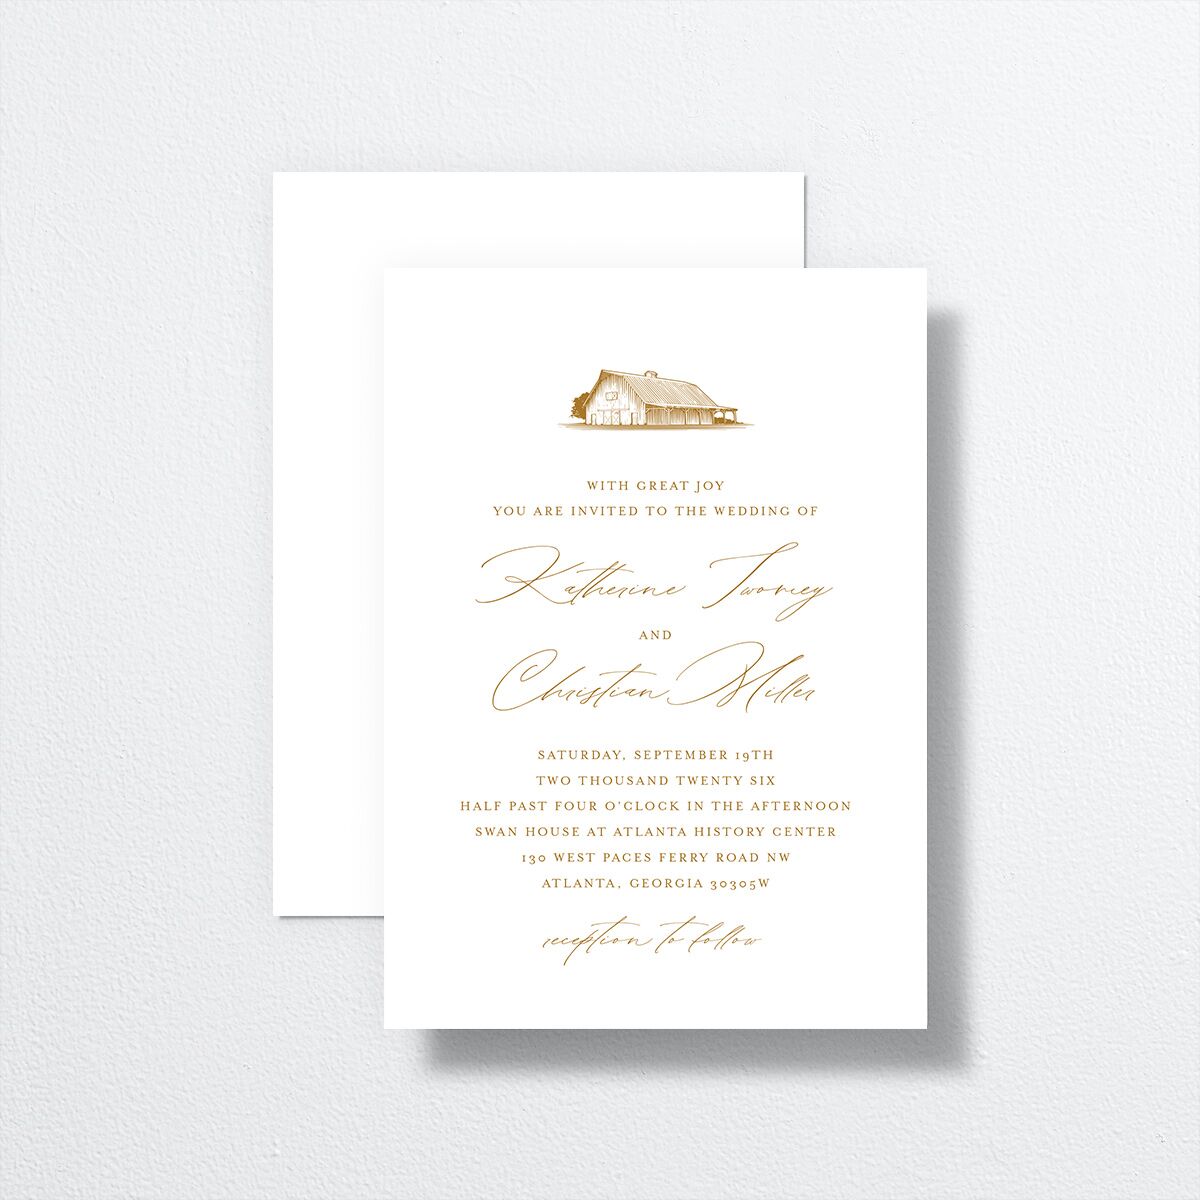 Classic Landscape Wedding Invitations front-and-back